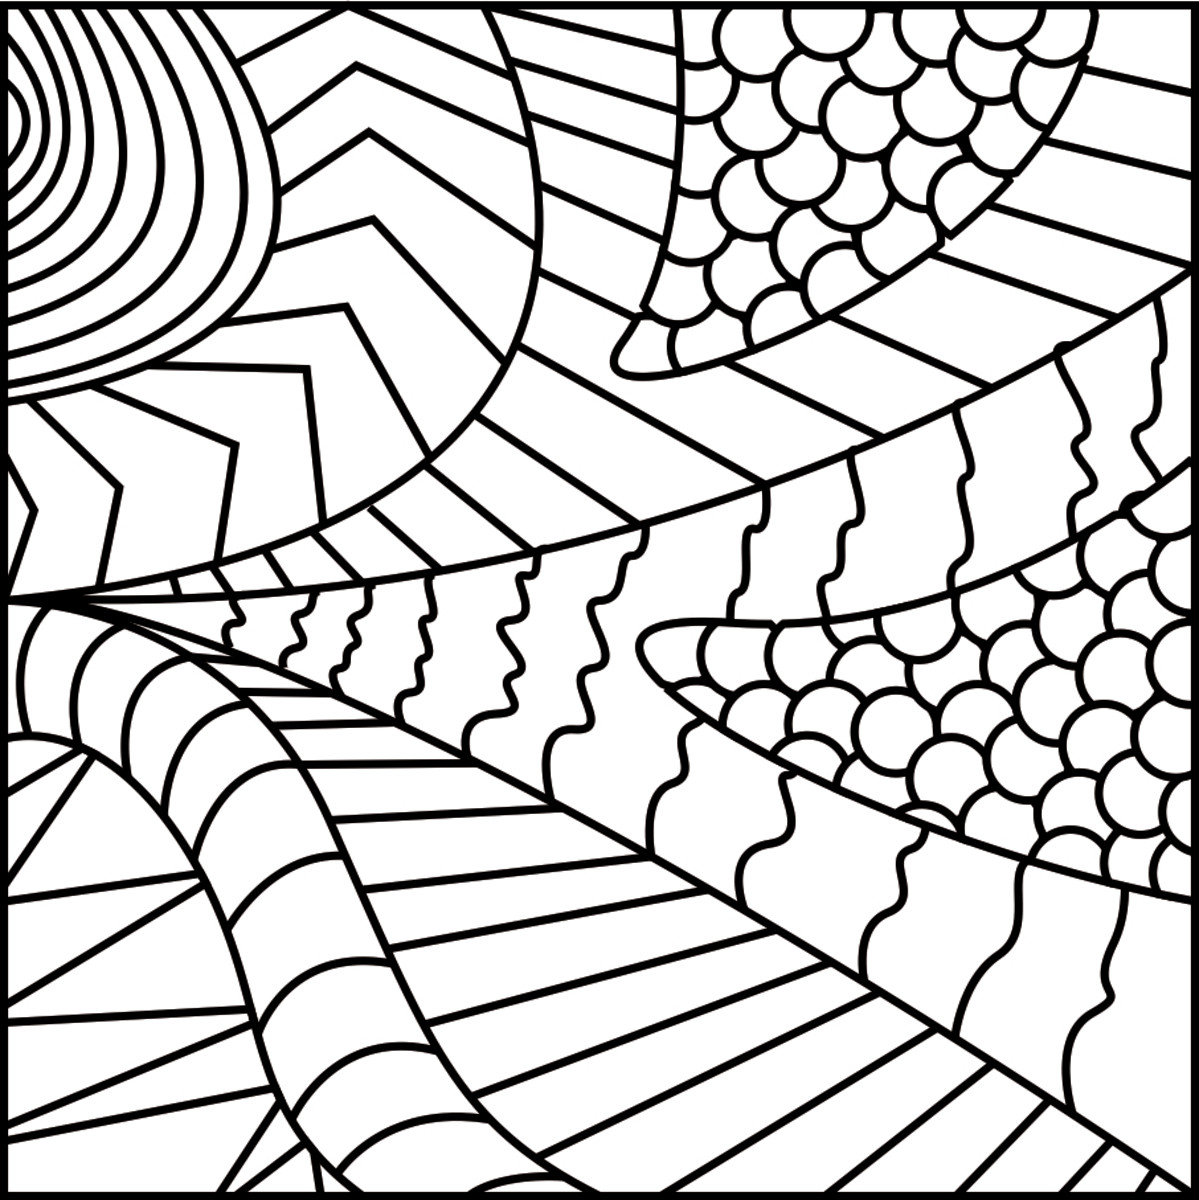 Repeat step three until your Zentangle is complete. Here is a Zentangle with every section filled.